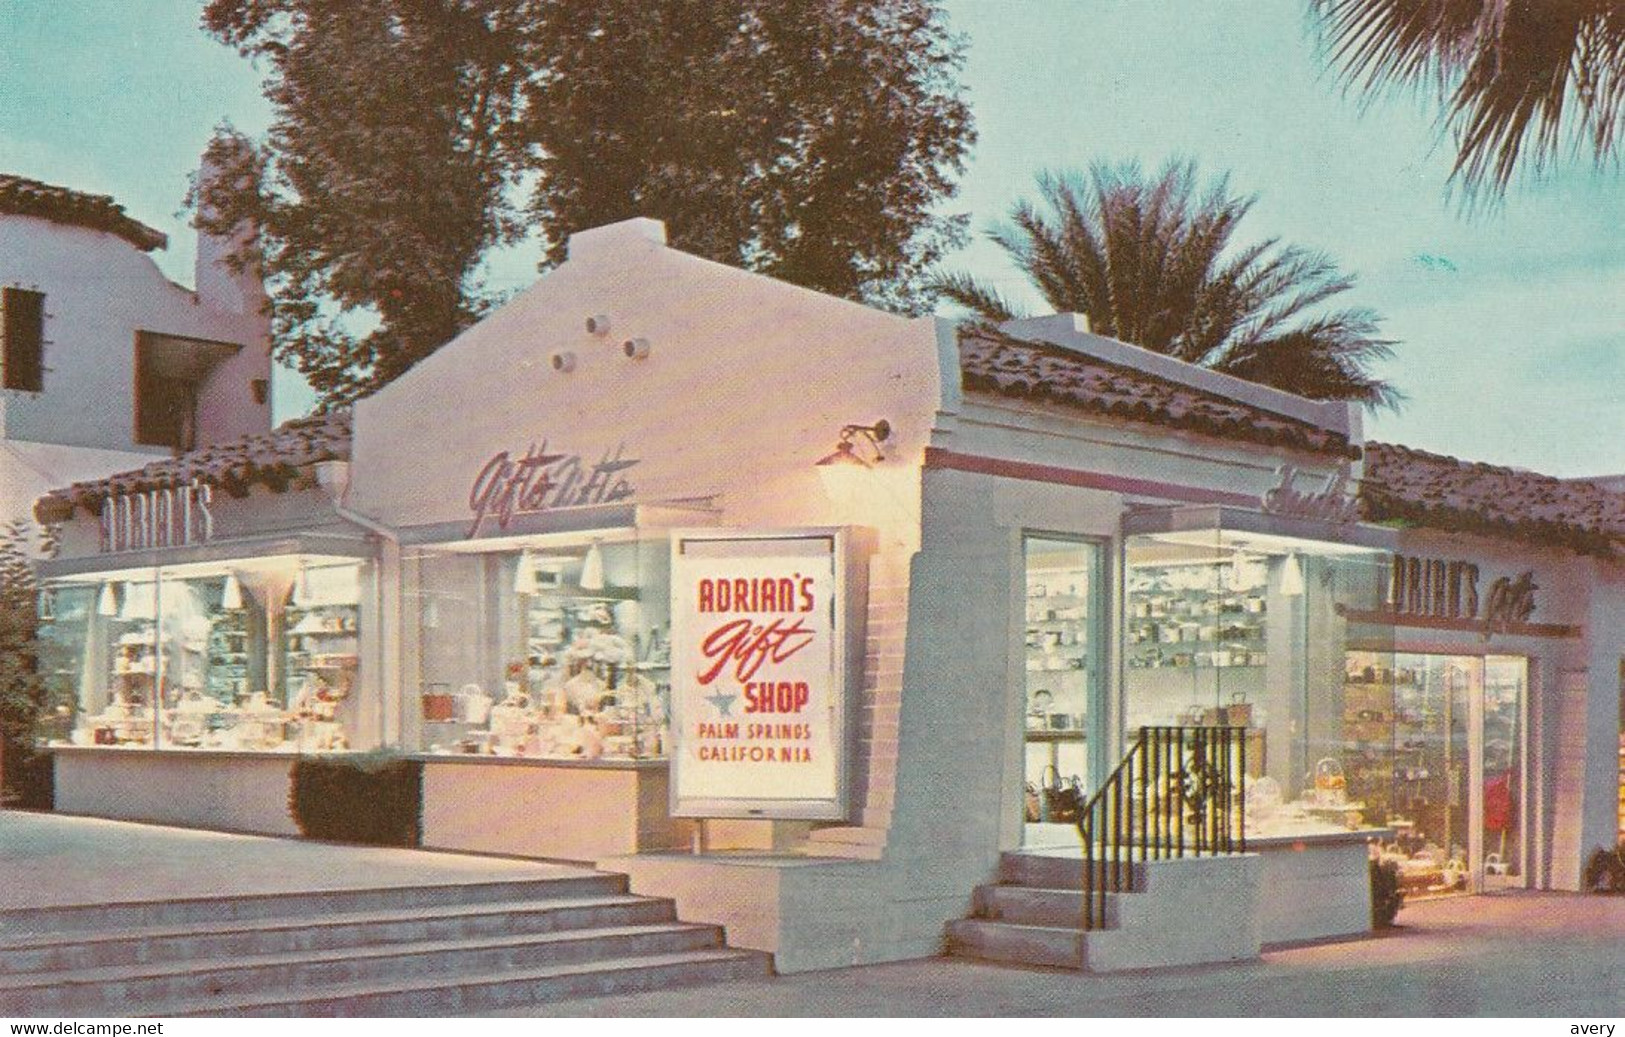 Adrian's Gift Shop, Palm Springs, California - Palm Springs